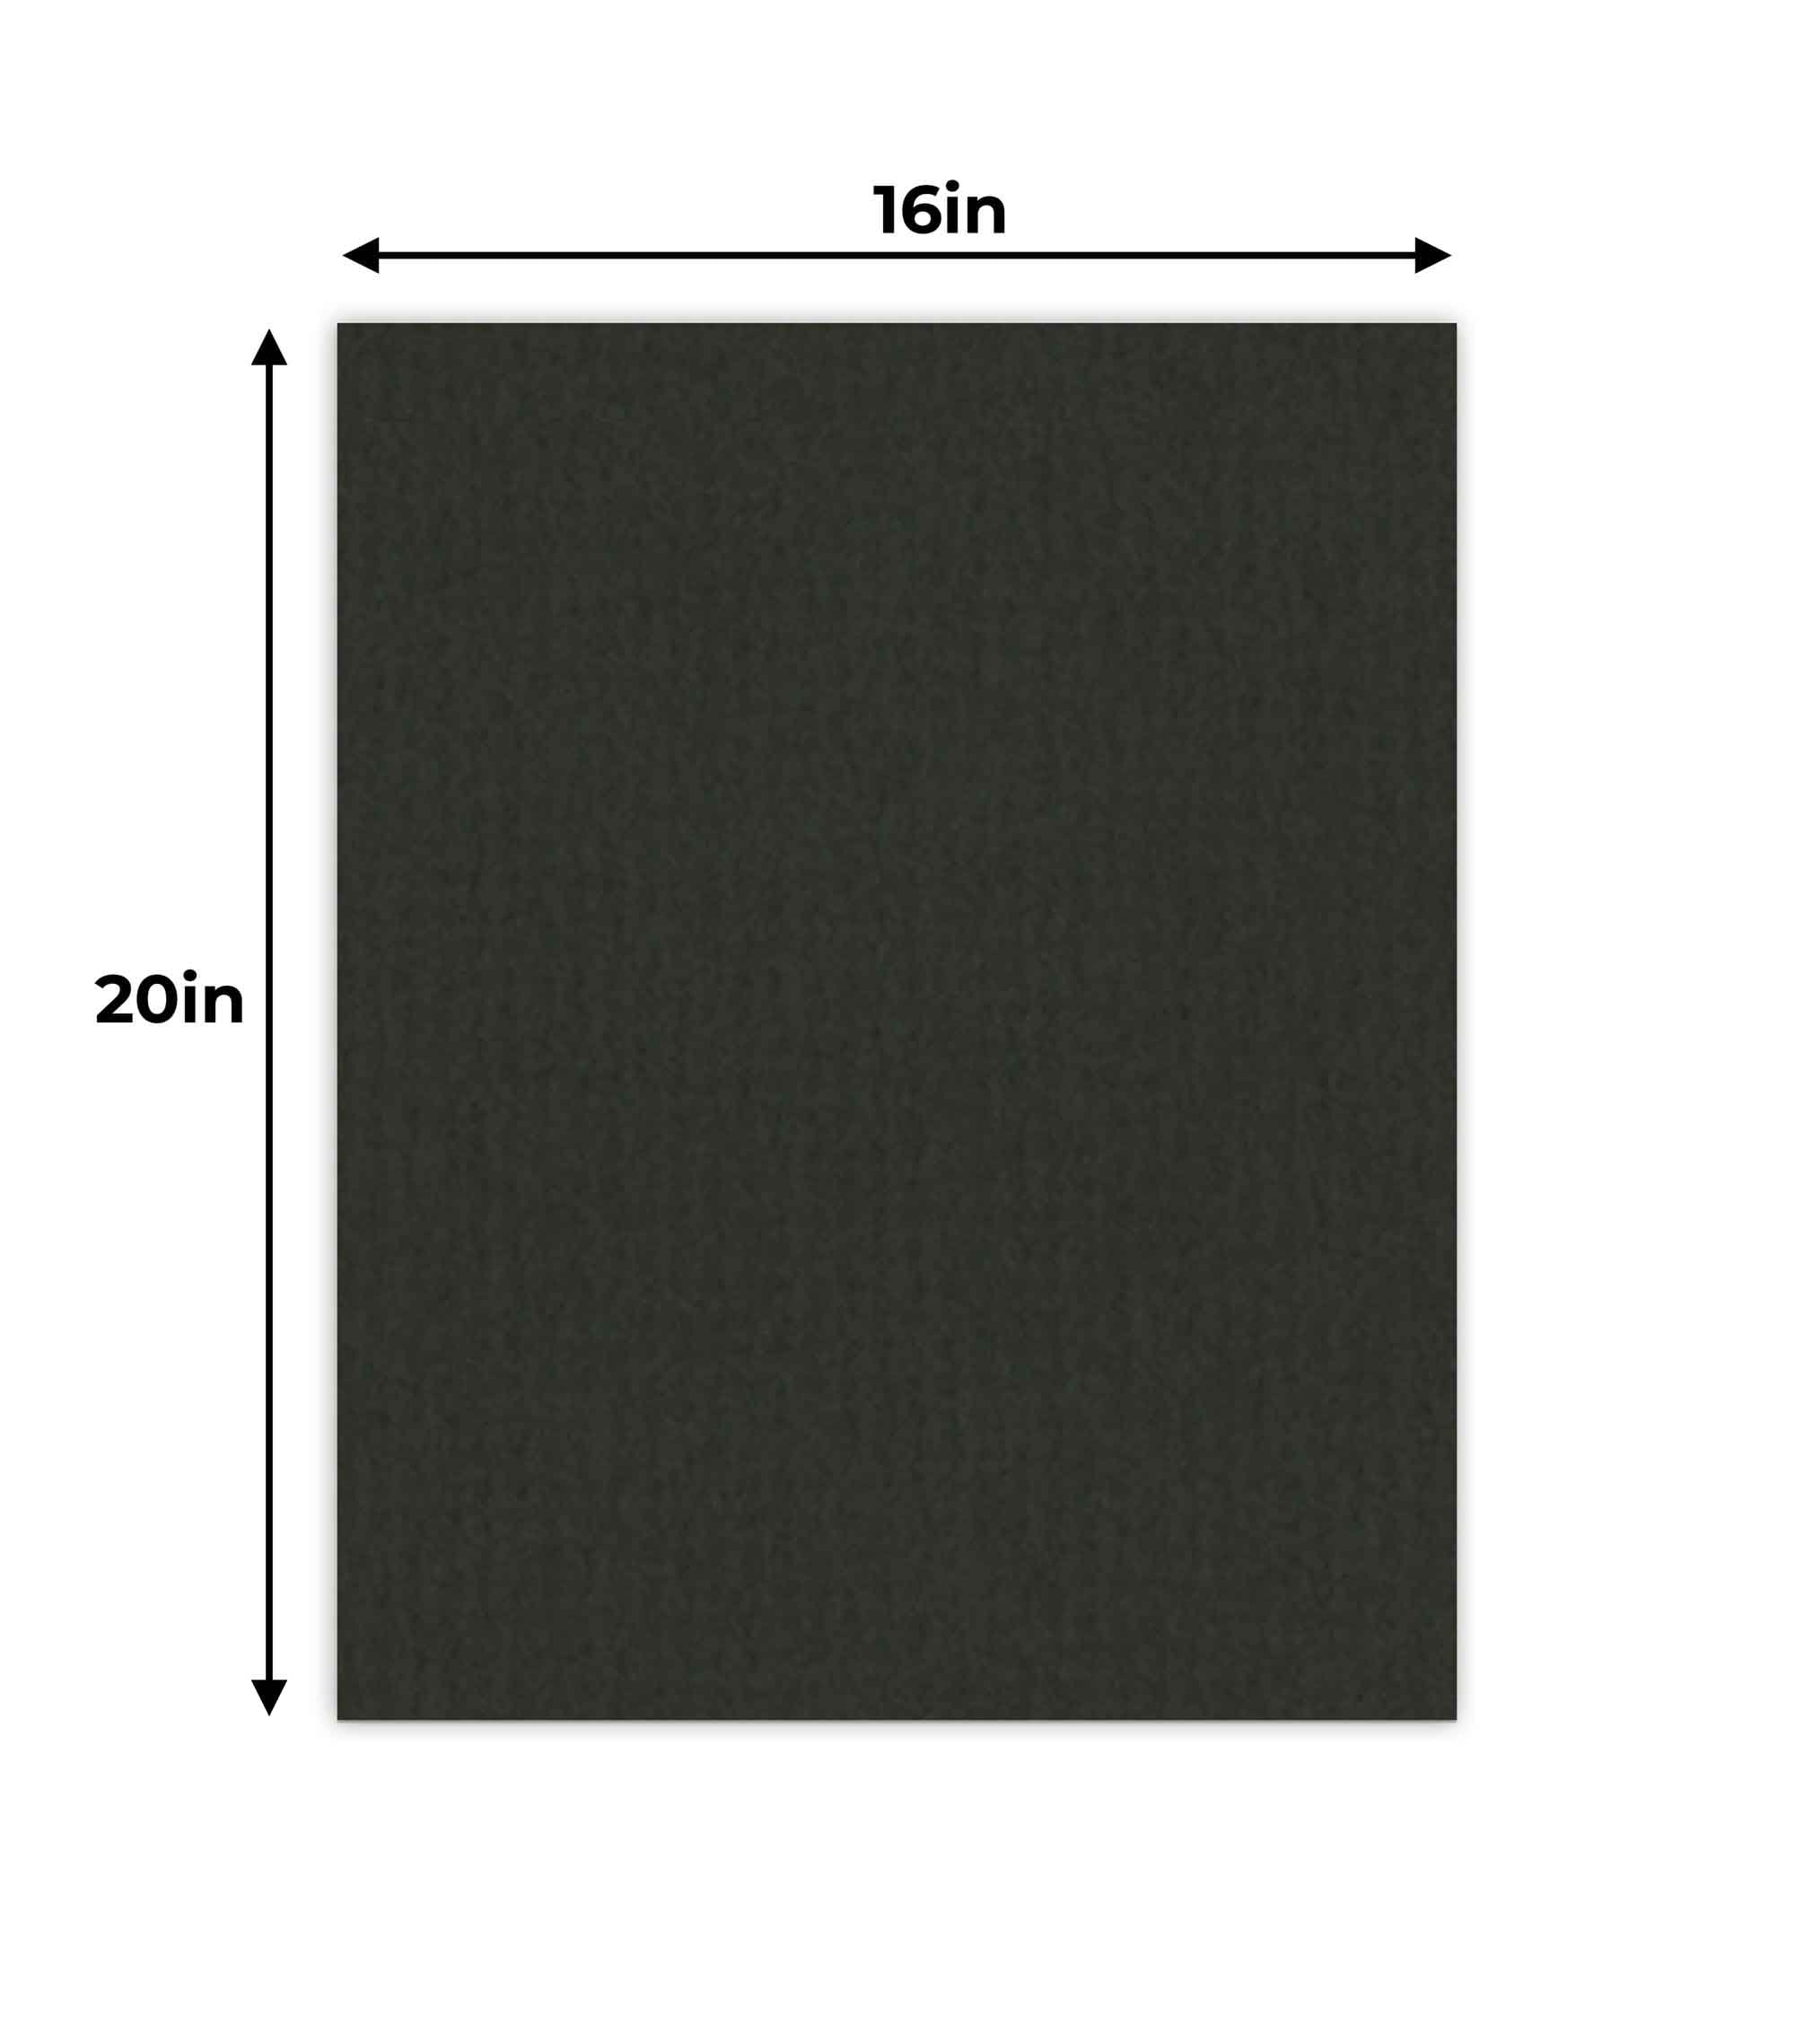  16x20 Mat Bevel Cut for 11x14 Photos - Acid Free Black with  Black Core Precut Matboard - for Pictures, Photos, Framing - 4-ply Thickness